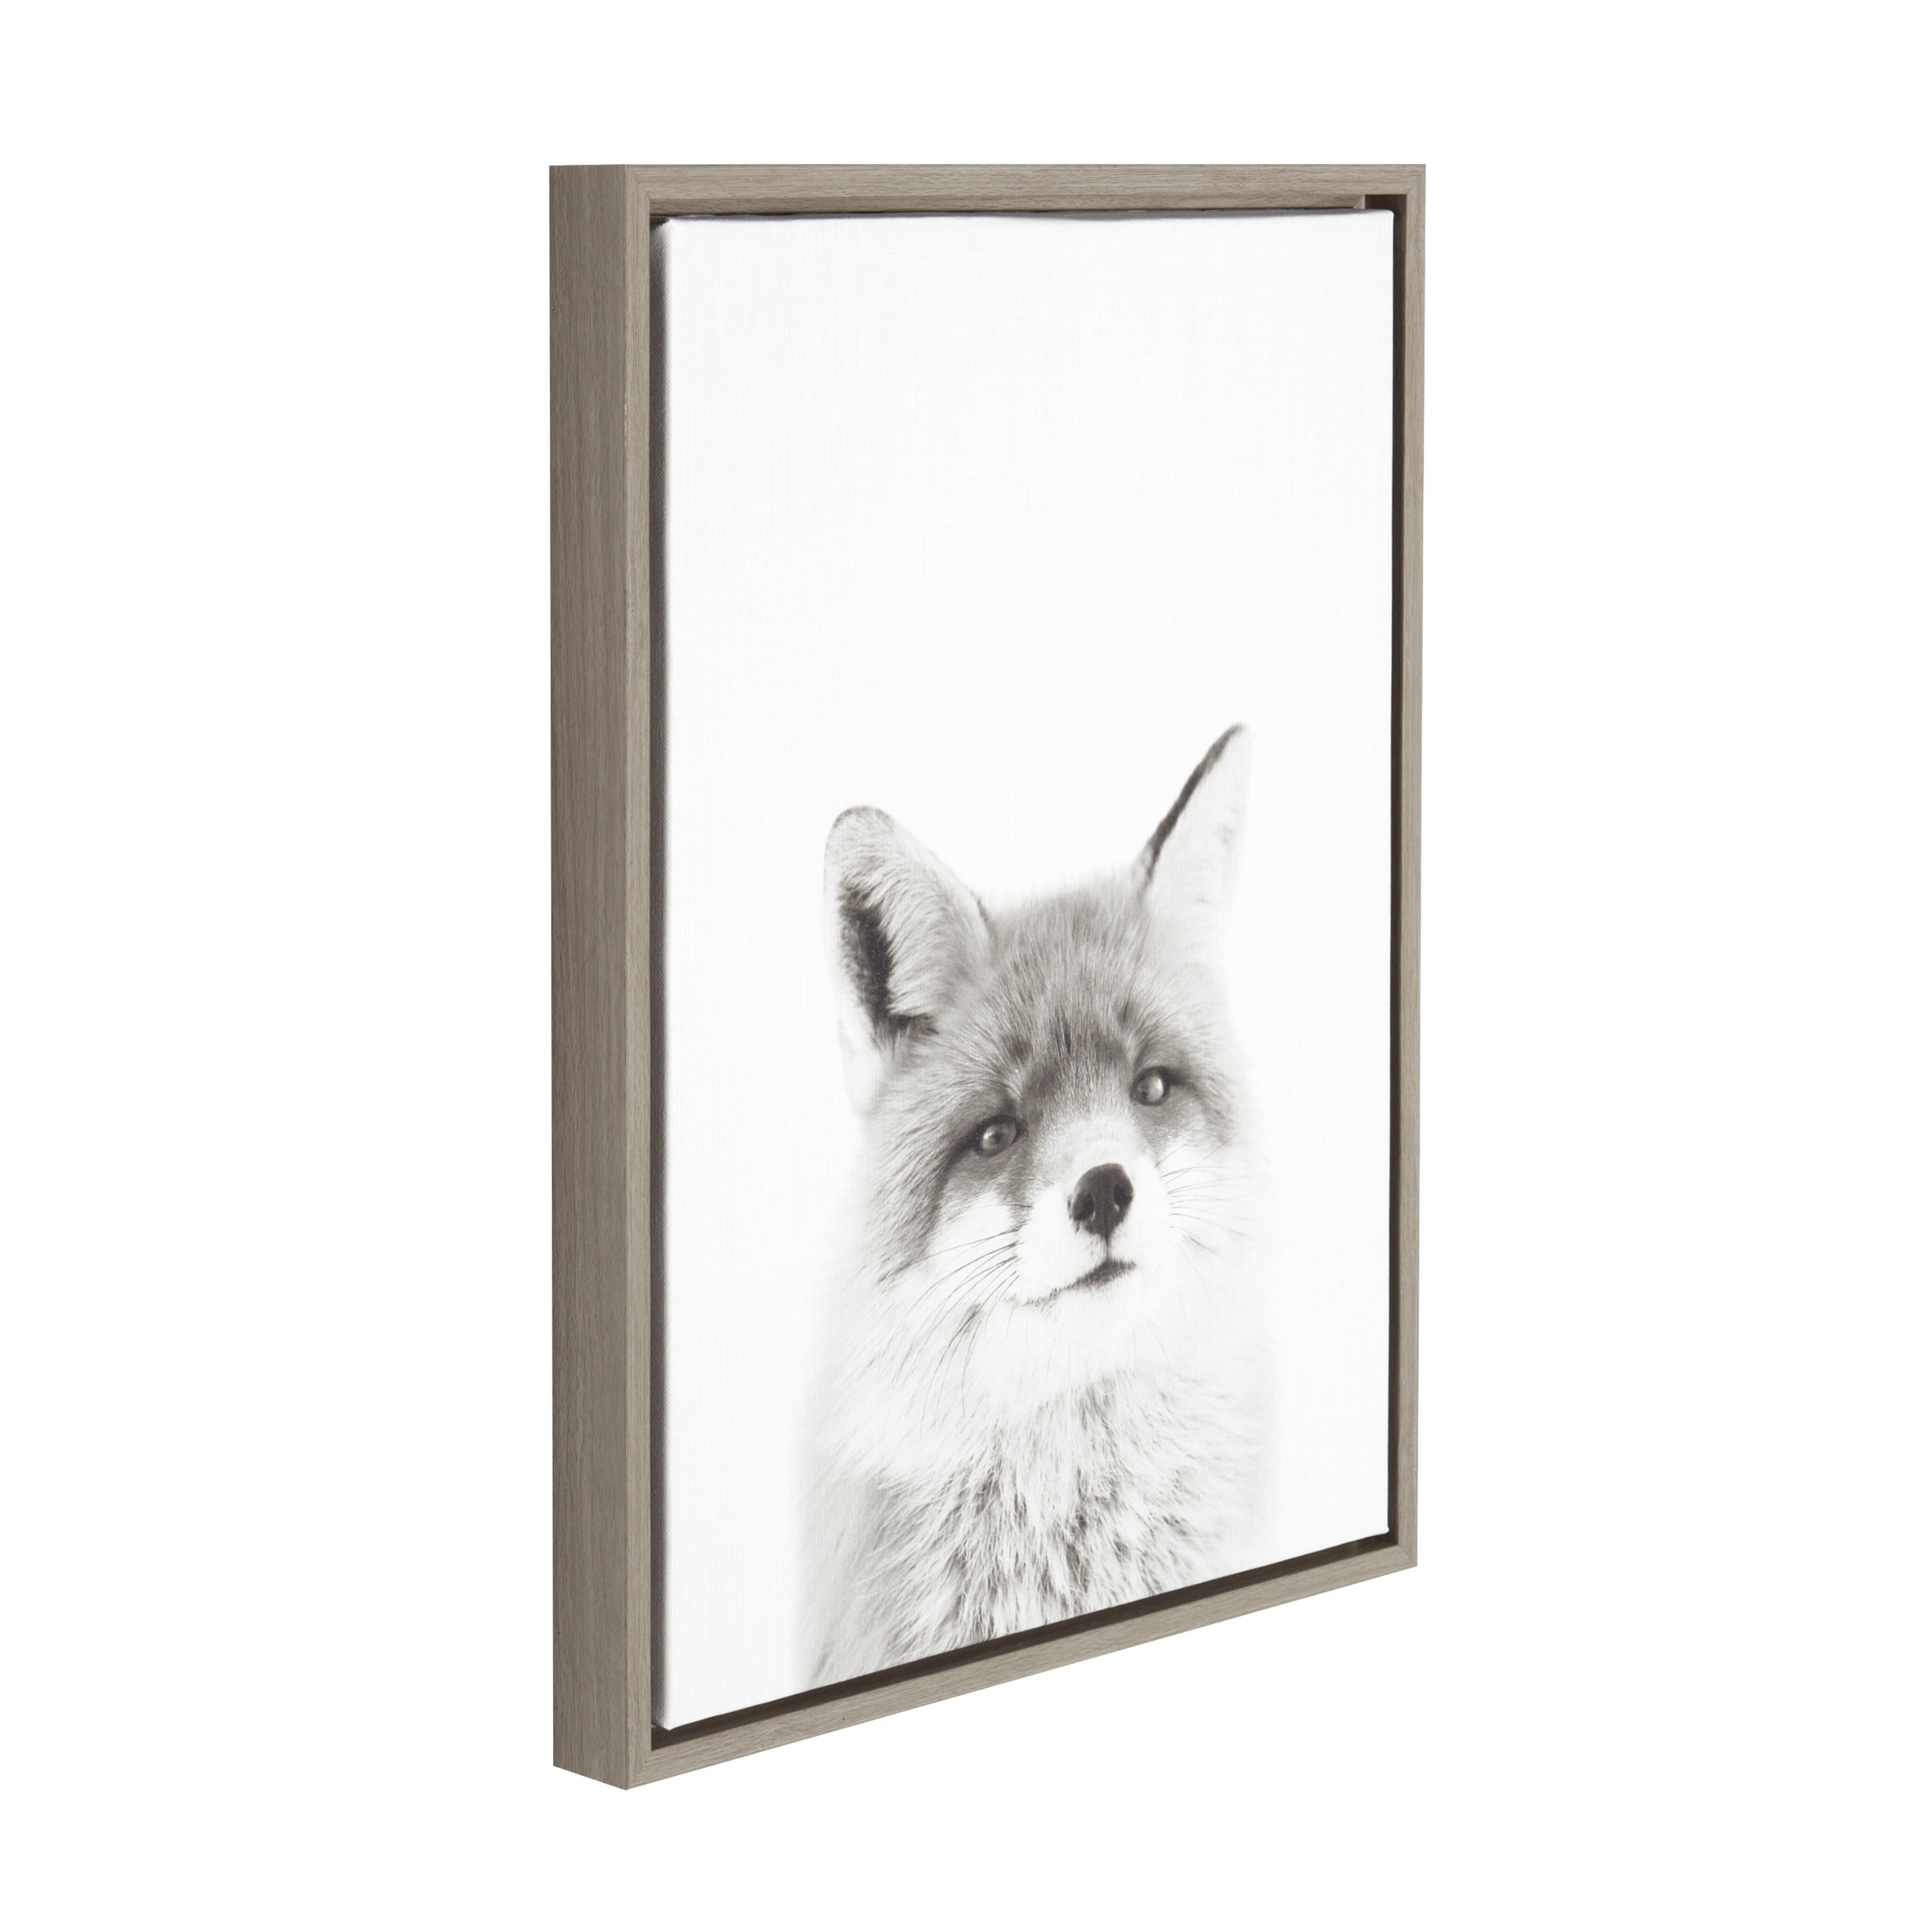 Kate and Laurel Sylvie Fox Black and White Portrait Framed Canvas Wall Art  by Simon Te Tai, 18x24 Gray